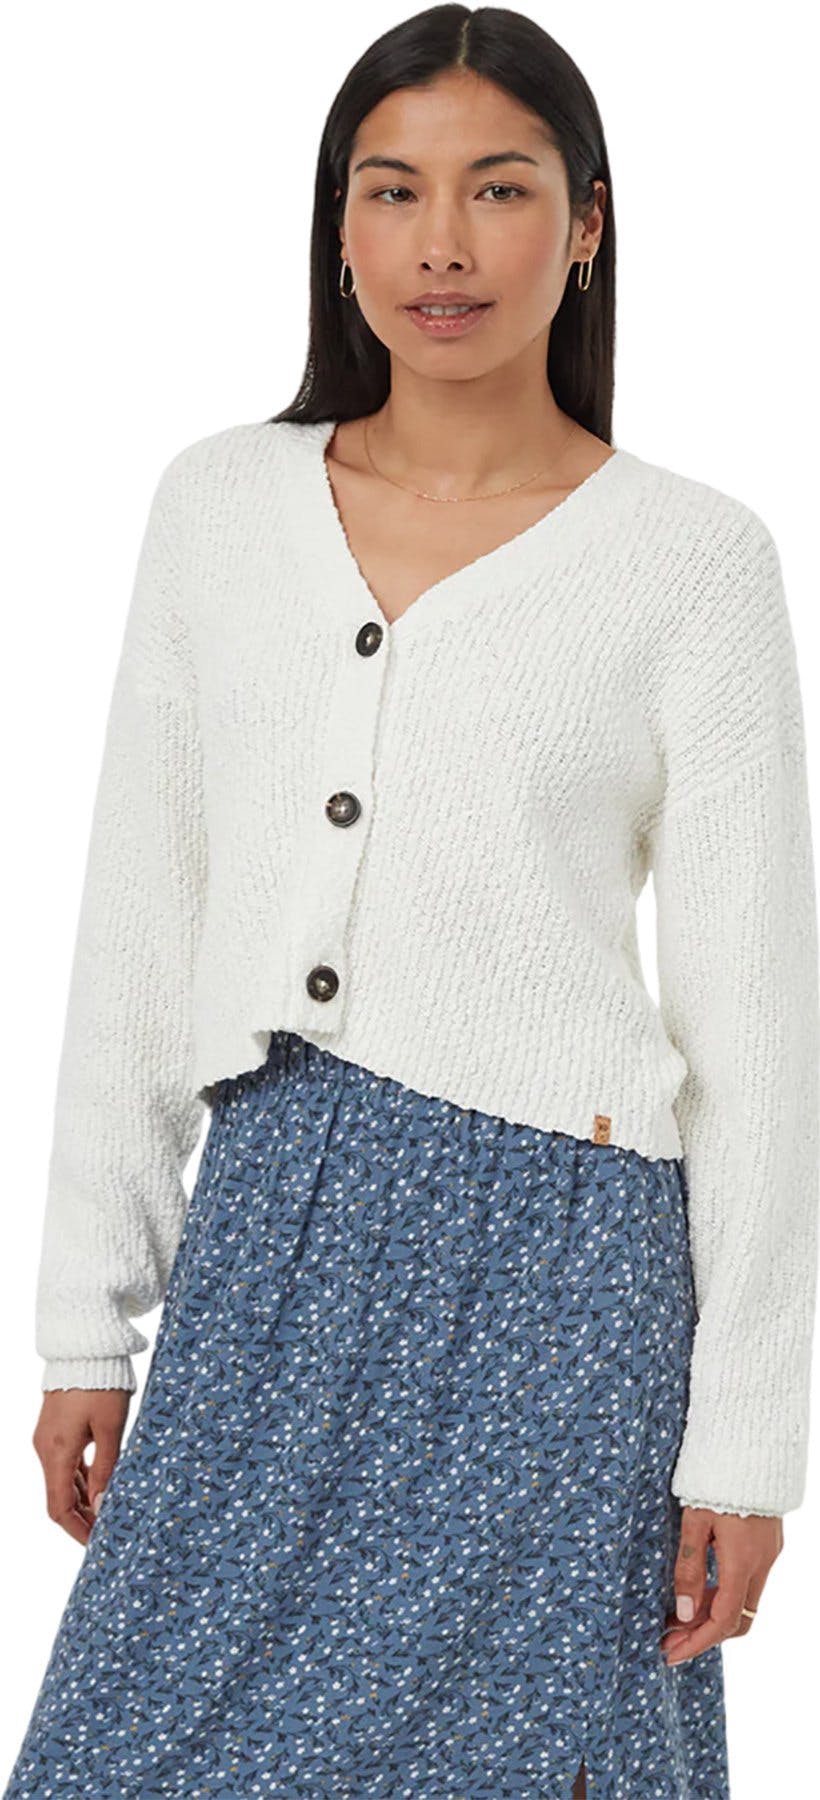 Product image for Highline Boucle Cardigan - Women's